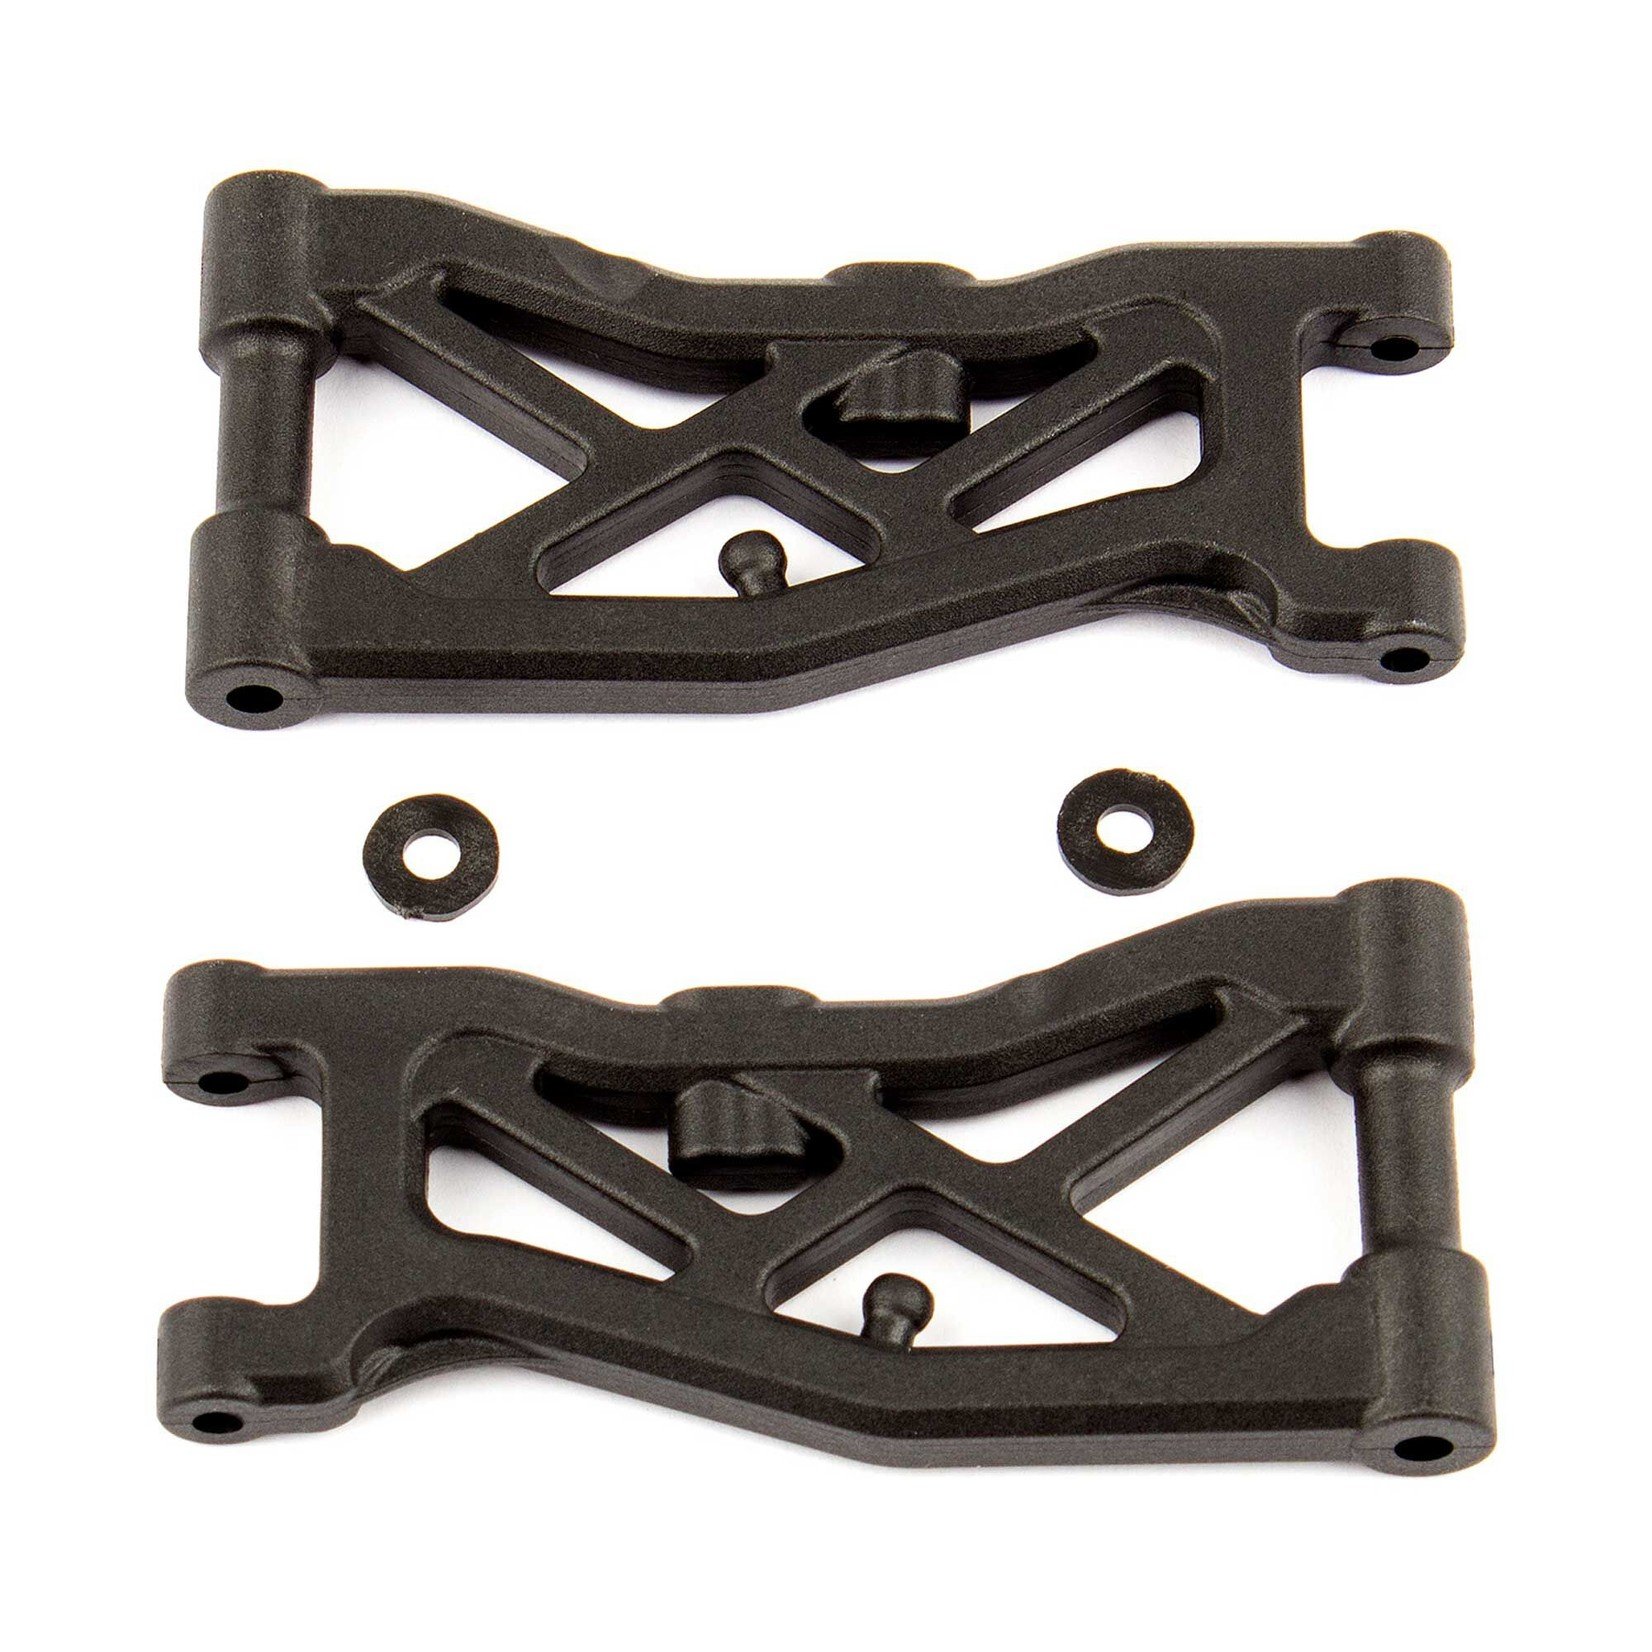 Team Associated Front Suspension Arms: RC10B74